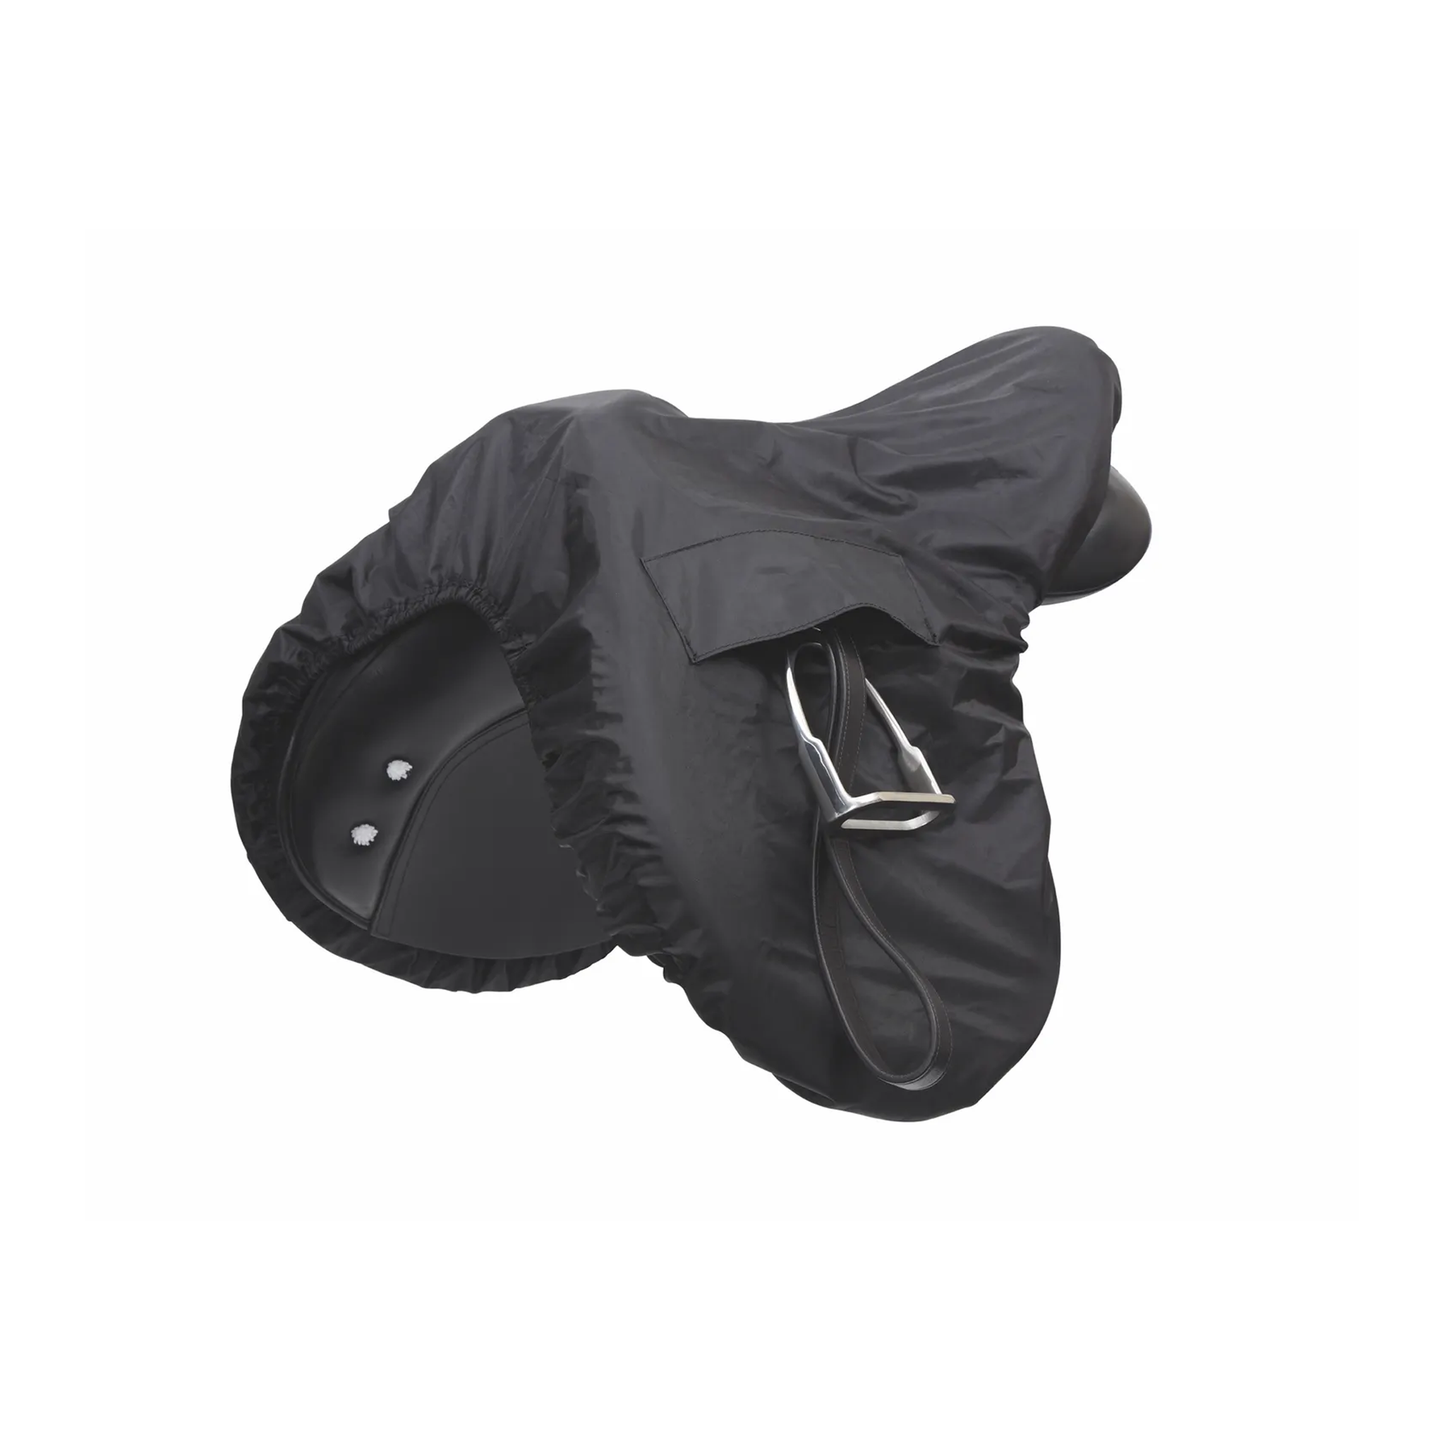 Waterproof Ride-On Saddle Cover